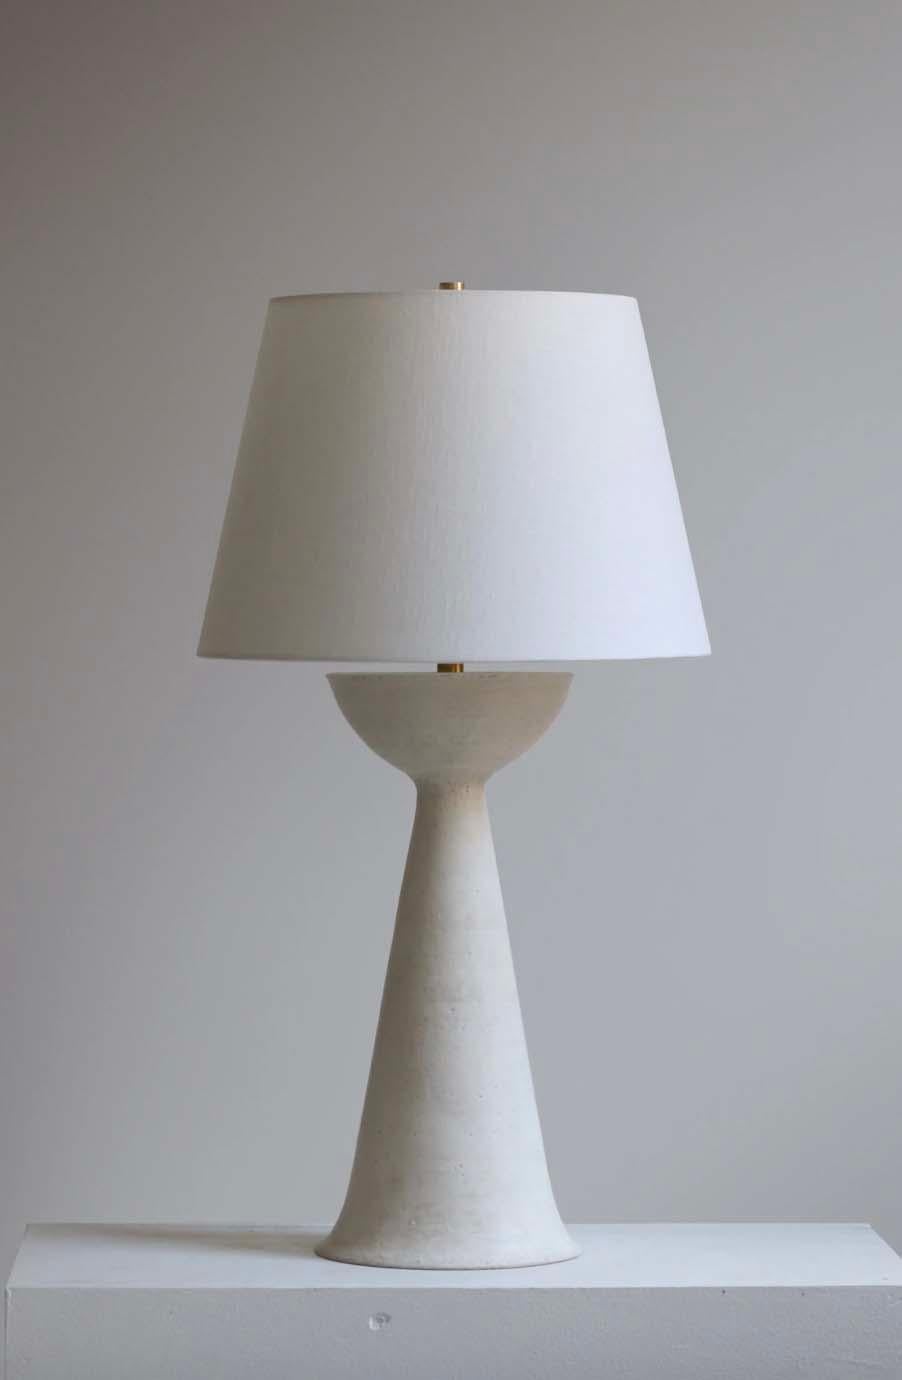 The Seneca lamp is handmade studio pottery by ceramic artist by Danny Kaplan. Shade included. Please note exact dimensions may vary.

Born in New York City and raised in Aix-en-Provence, France, Danny Kaplan’s passion for ceramics was shaped by